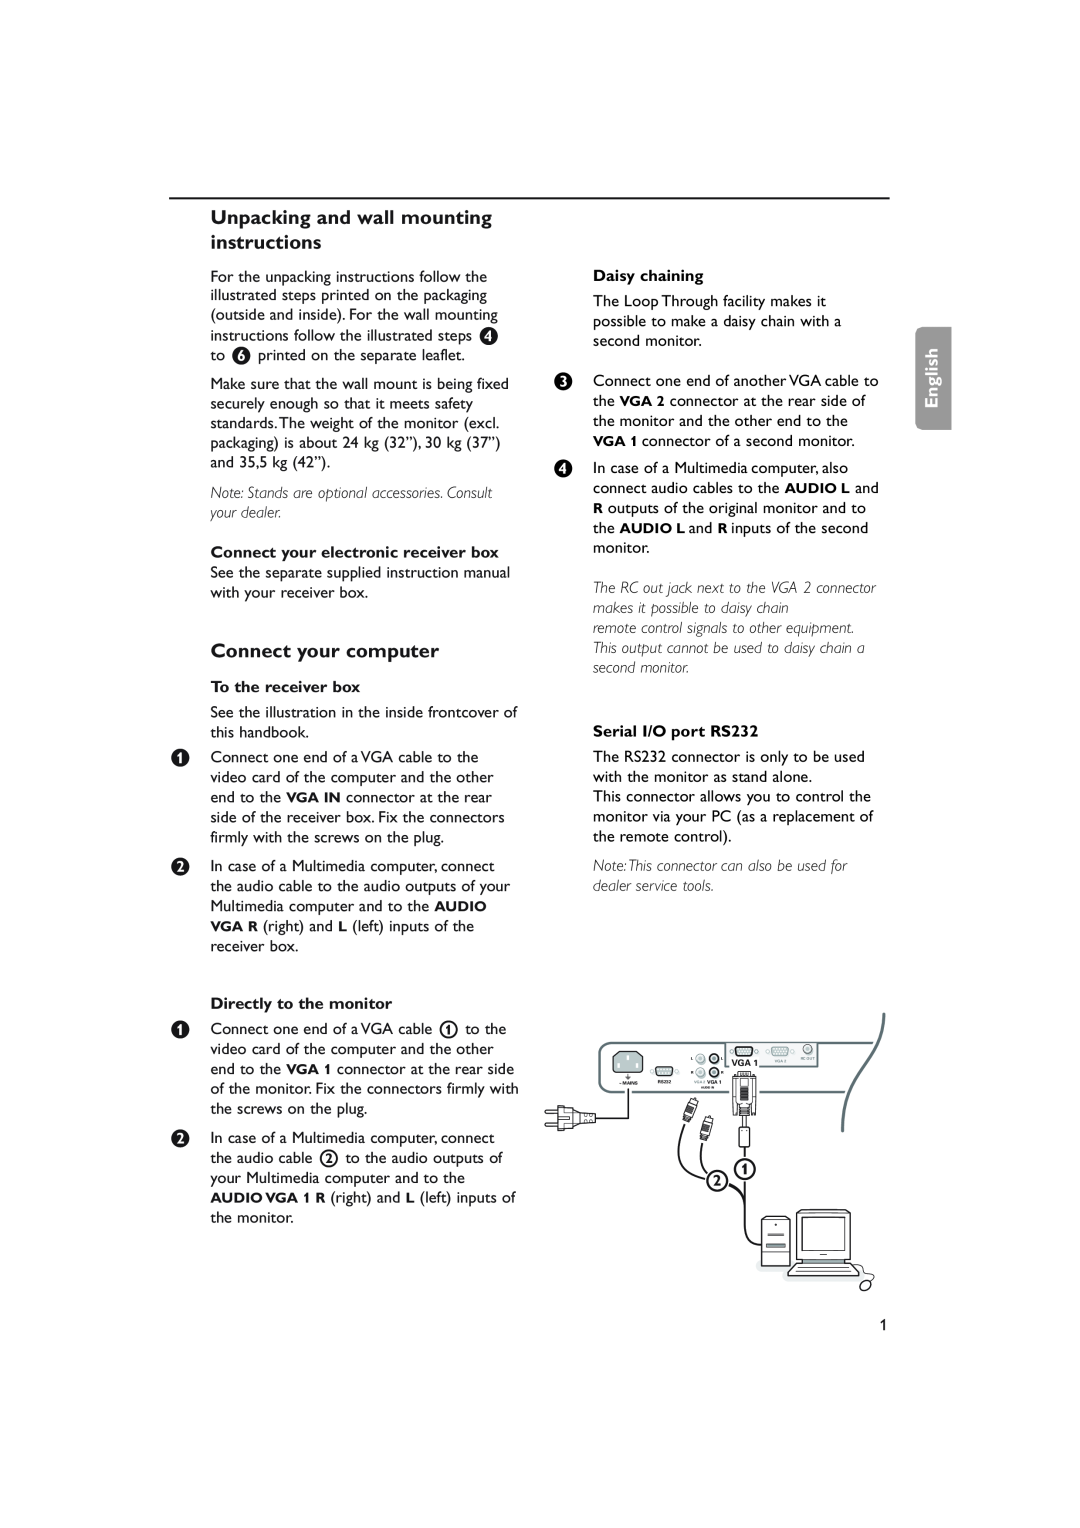 Philips RS232 manual Unpacking and wall mounting instructions, Connect your computer, English 